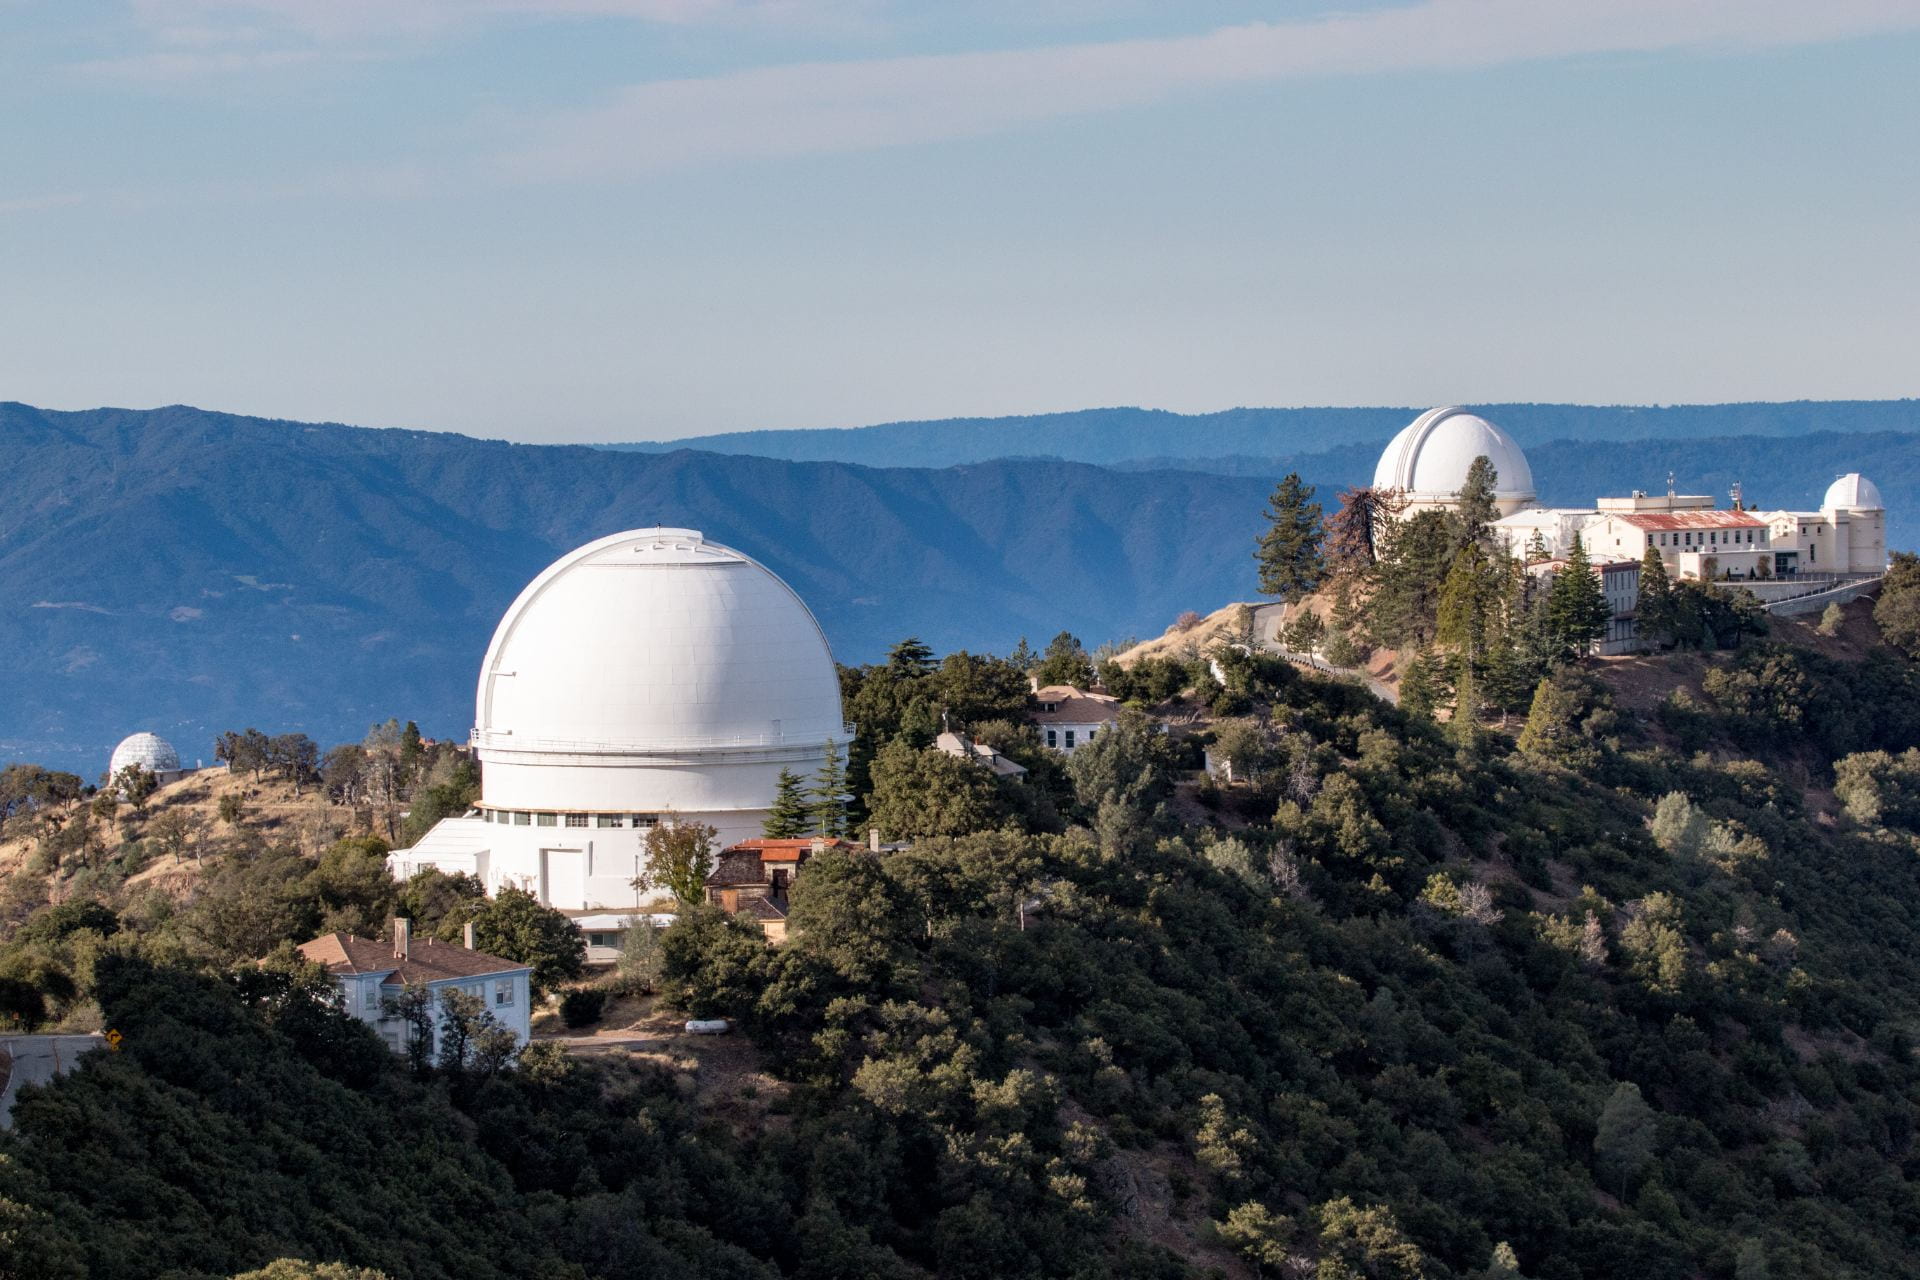 Major expansion of Lick Observatory education programs will benefit Bay Area students